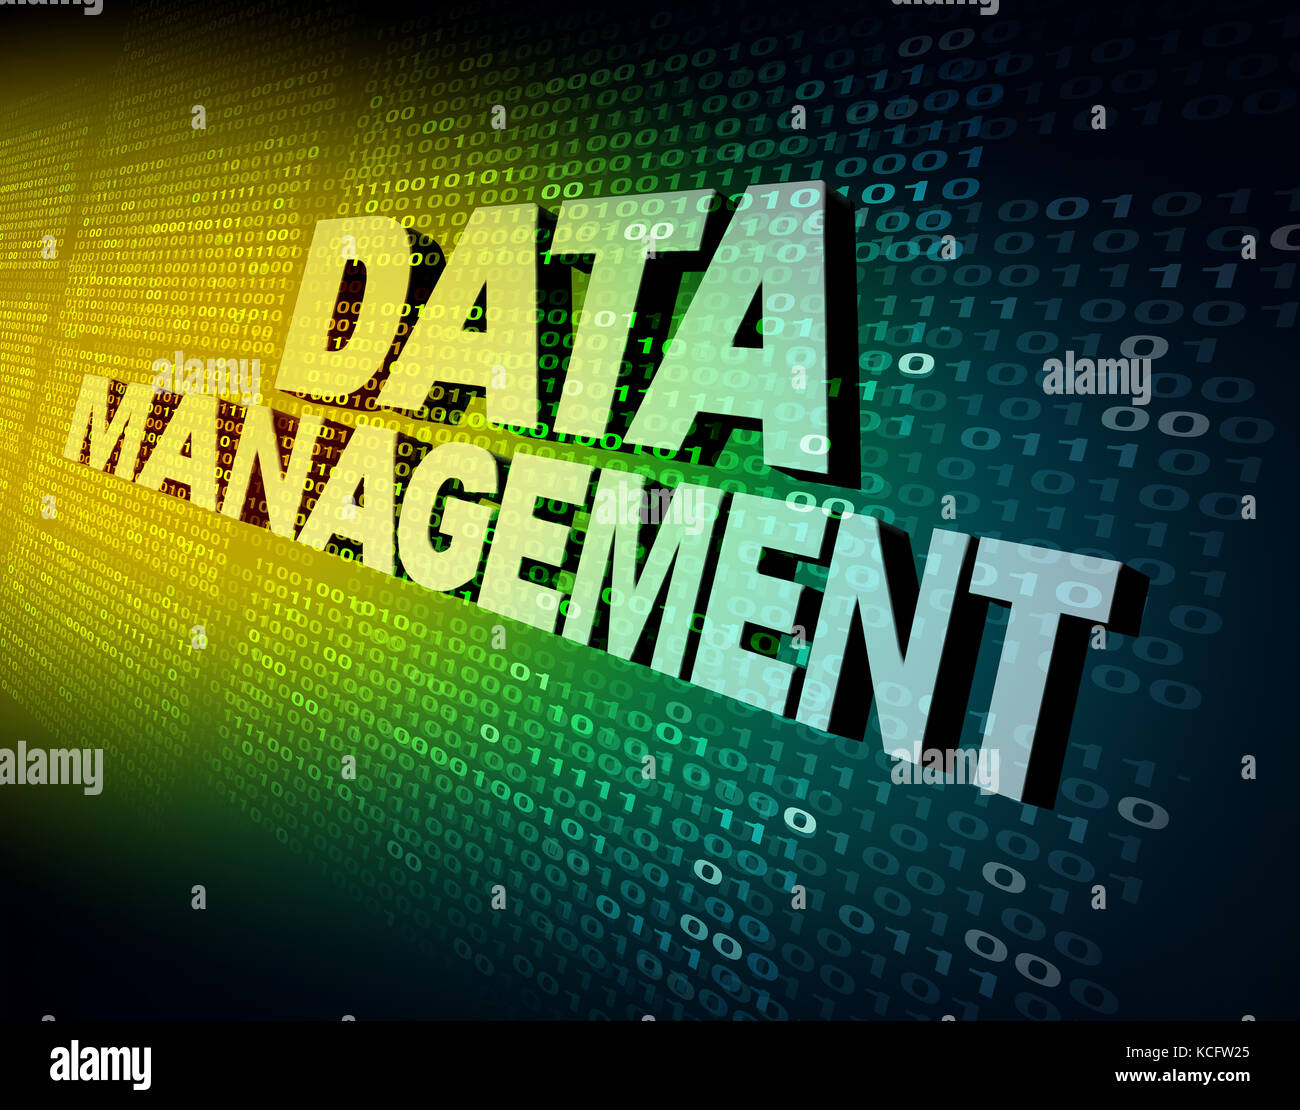 Data management and computing internet analytic database storage and programming technology marketing concept as a 3D illustration. Stock Photo